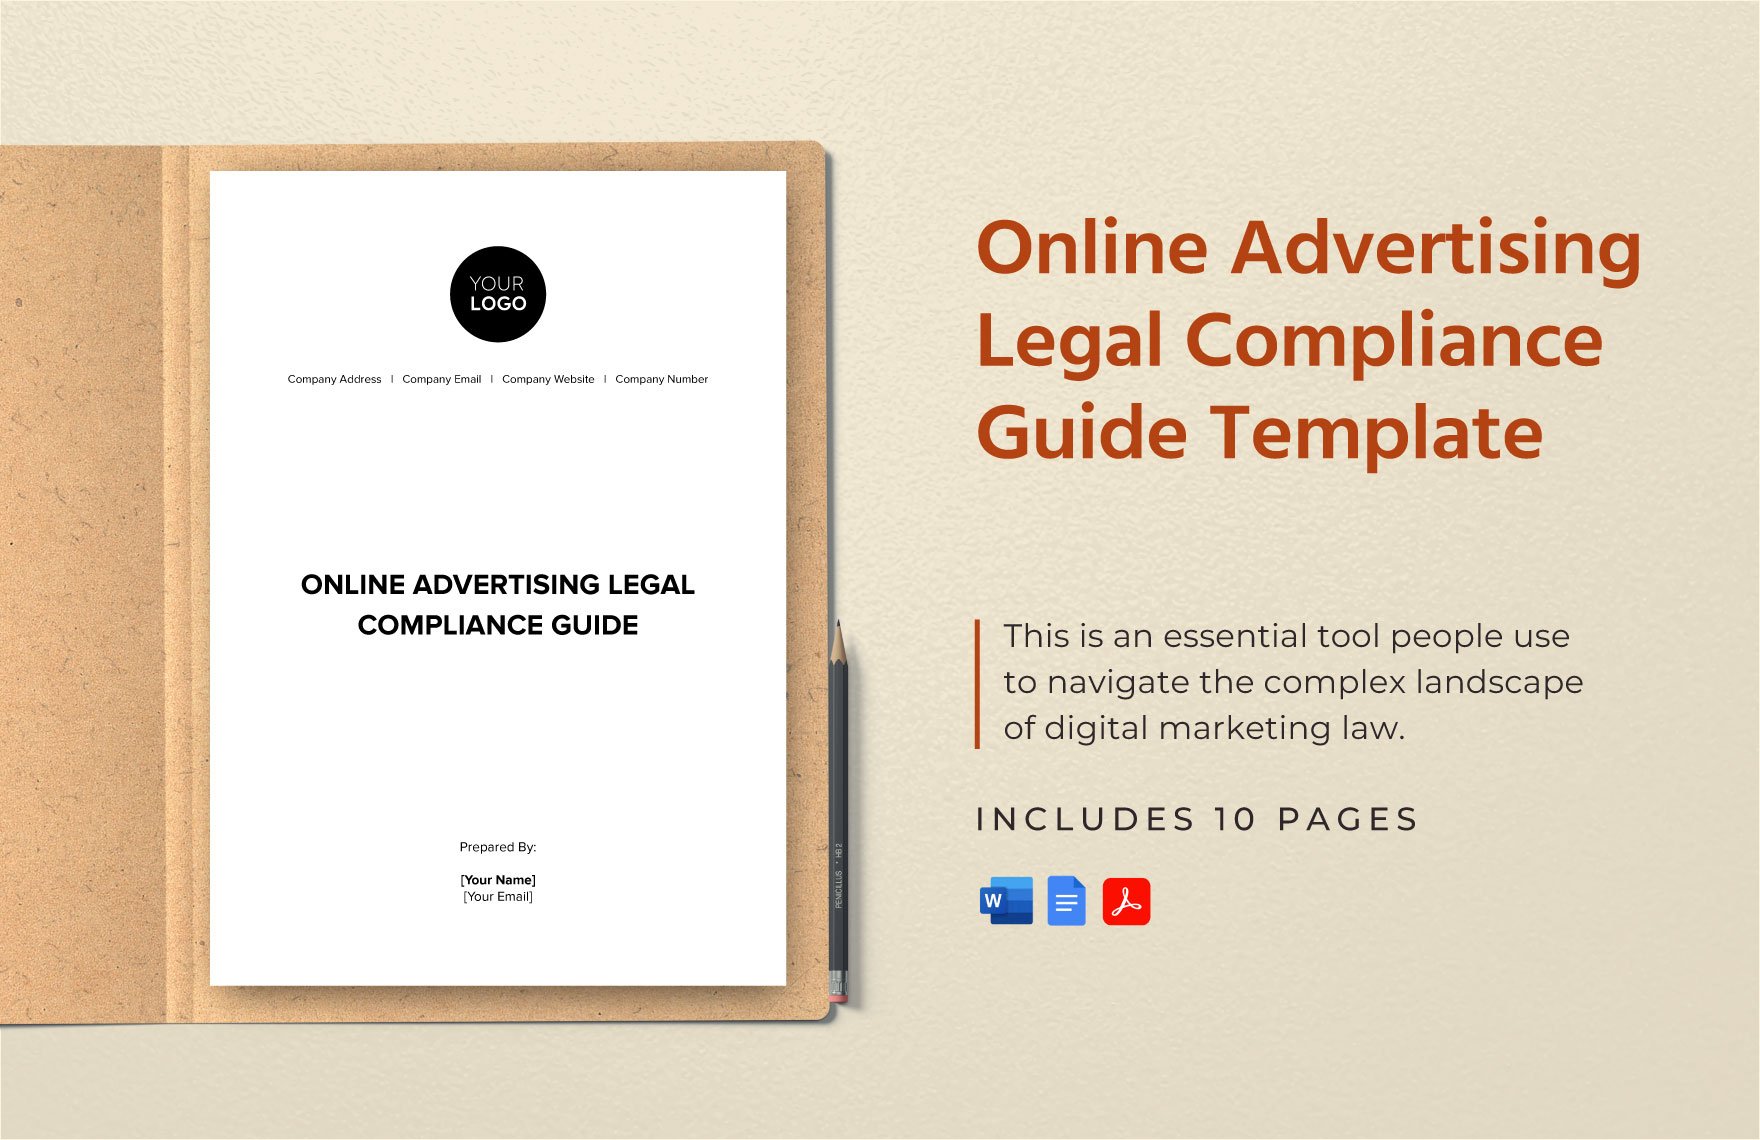 Online Advertising Legal Compliance Guide Template in Word, Google Docs, PDF